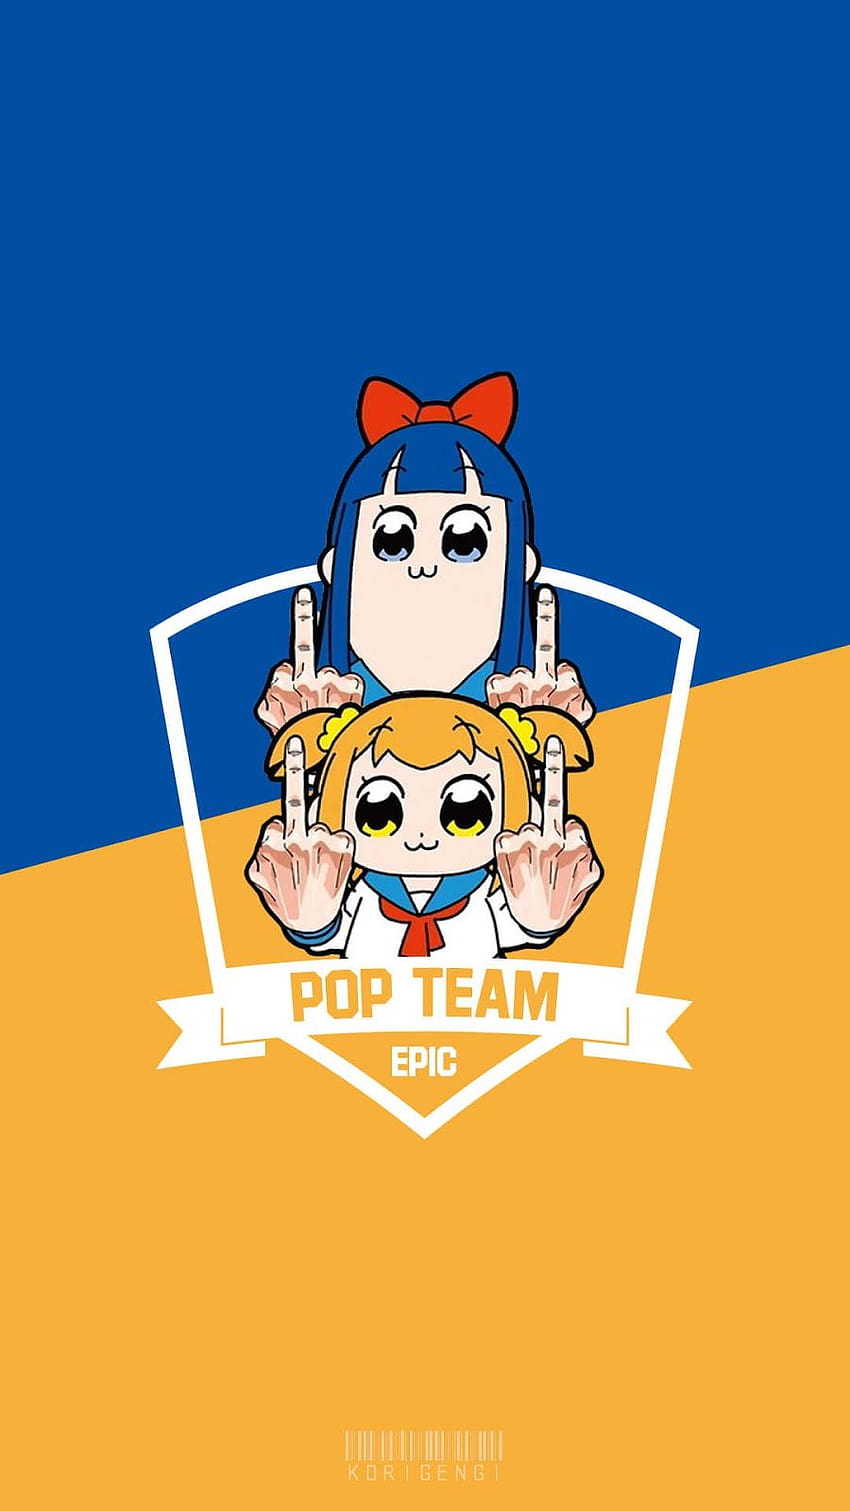 1920x1080px, 1080P Free download | Pop Team Epic Phone, epic mobile HD ...